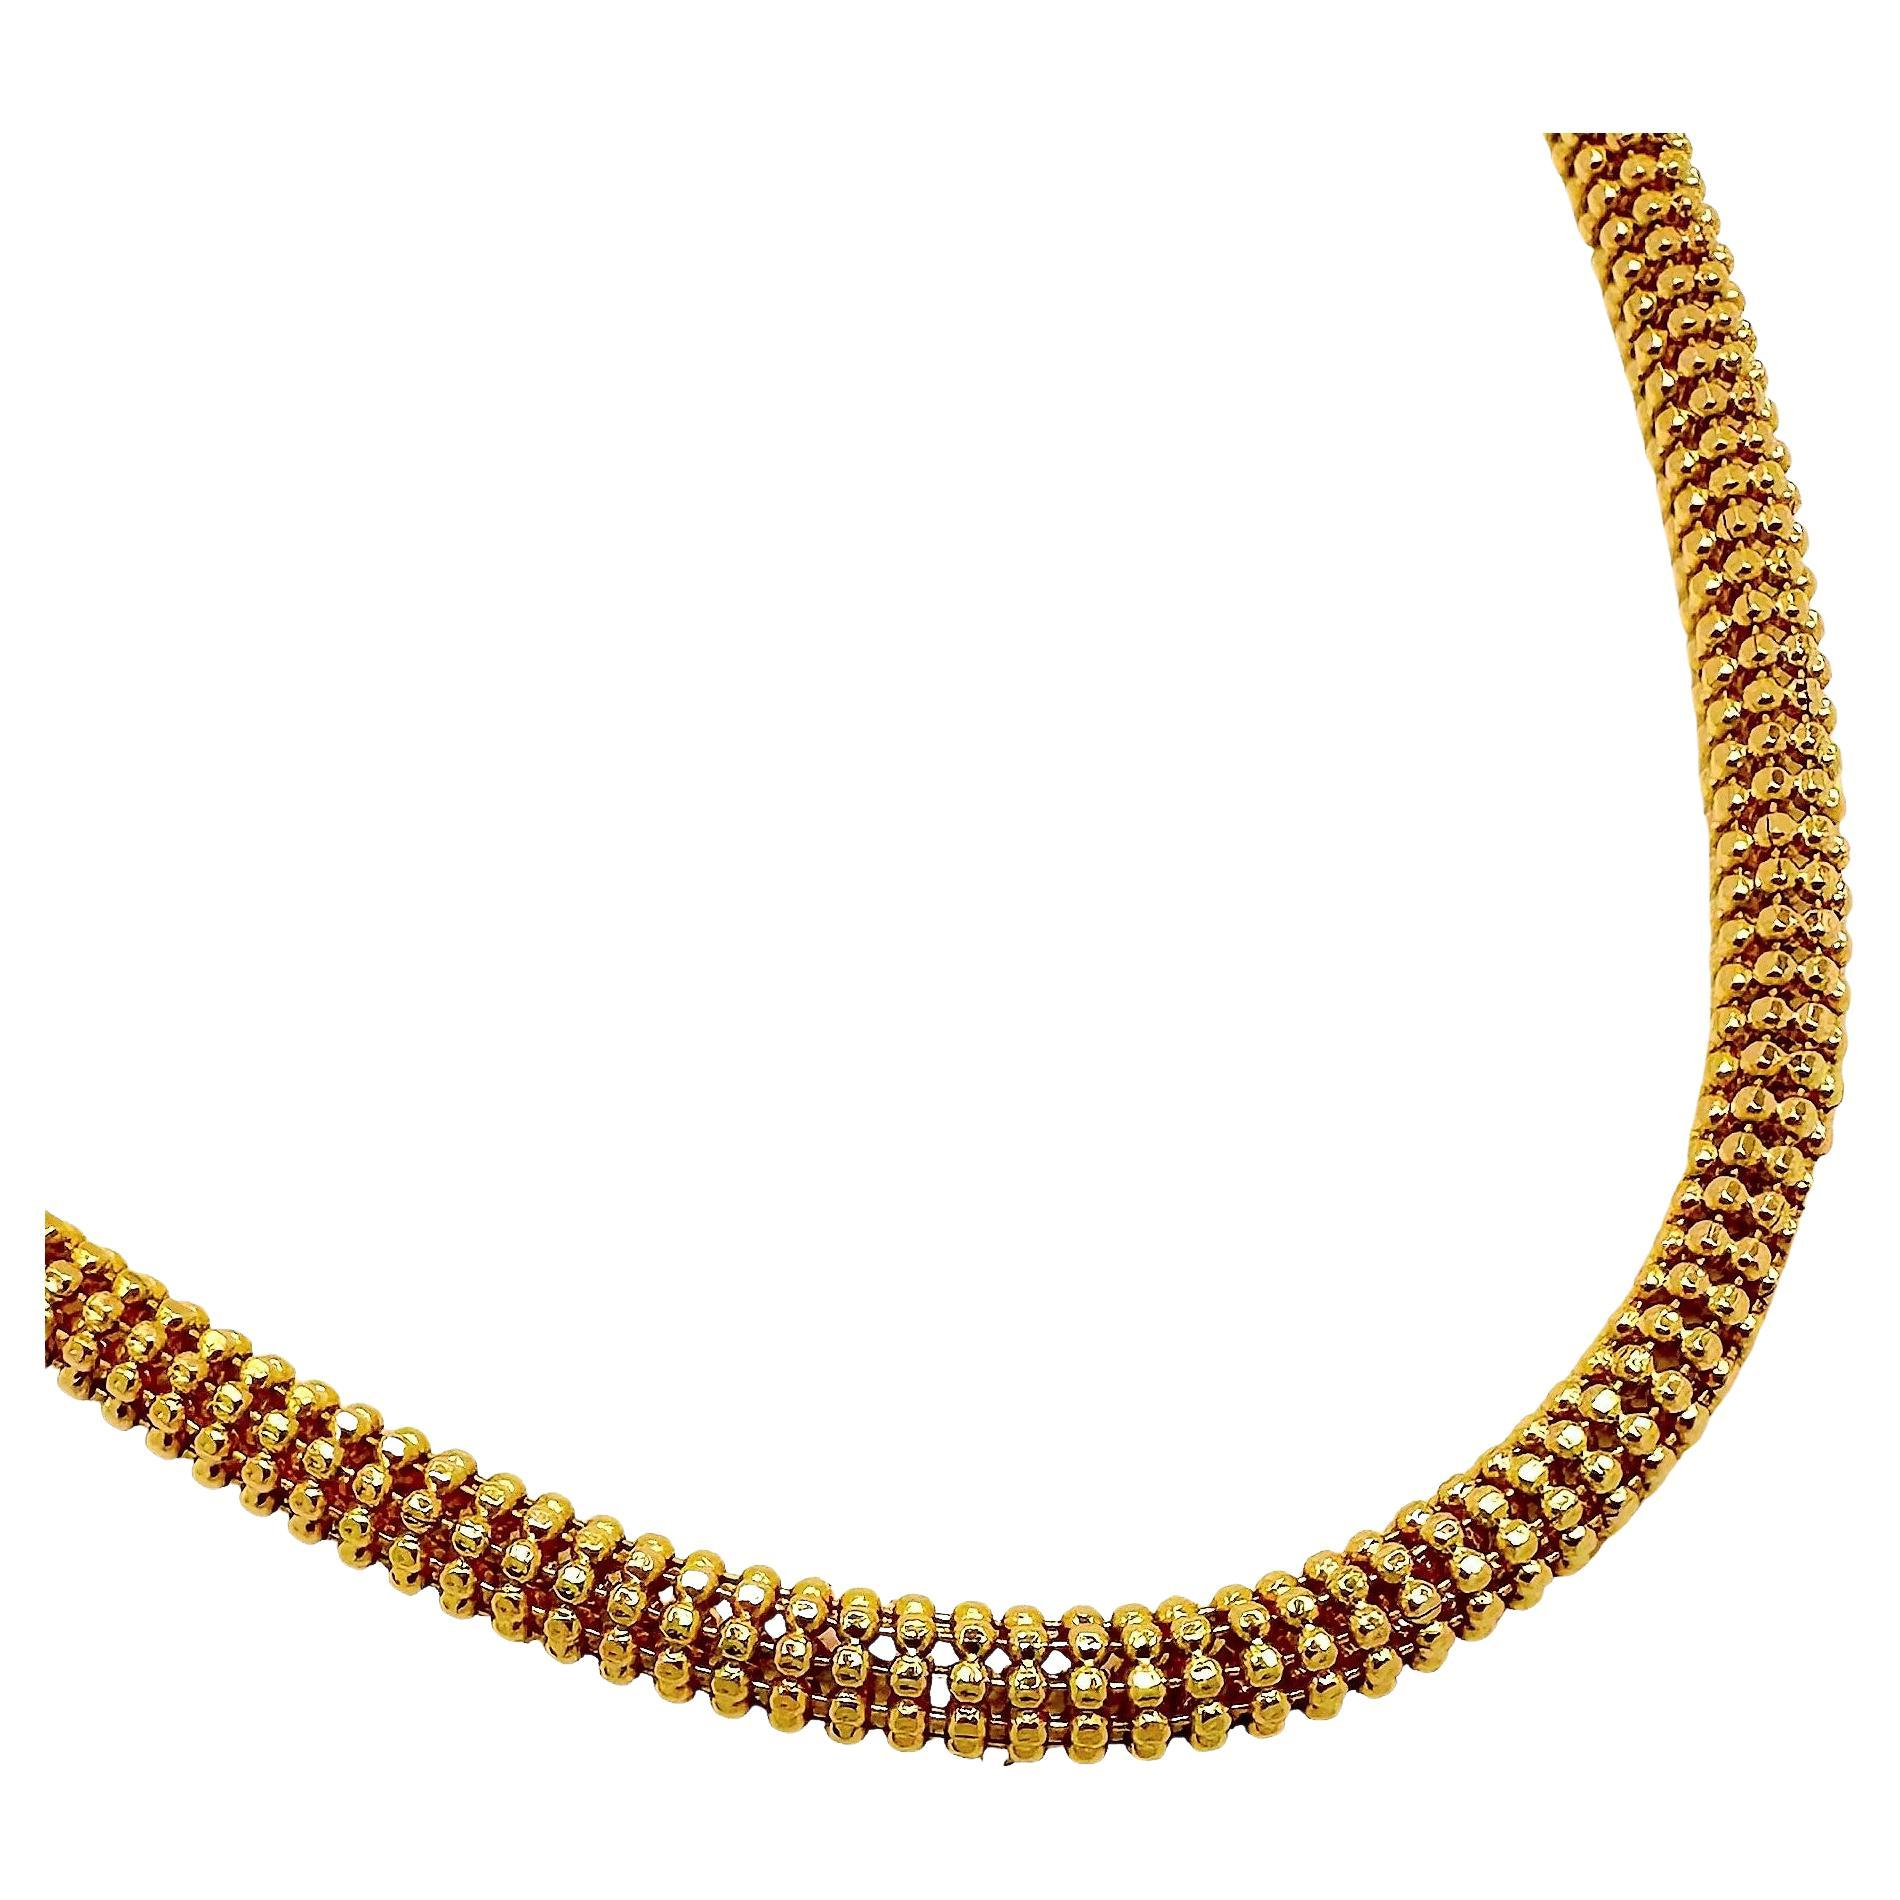 Round Italian 14K Yellow Gold Flexible Neck Chain For Sale